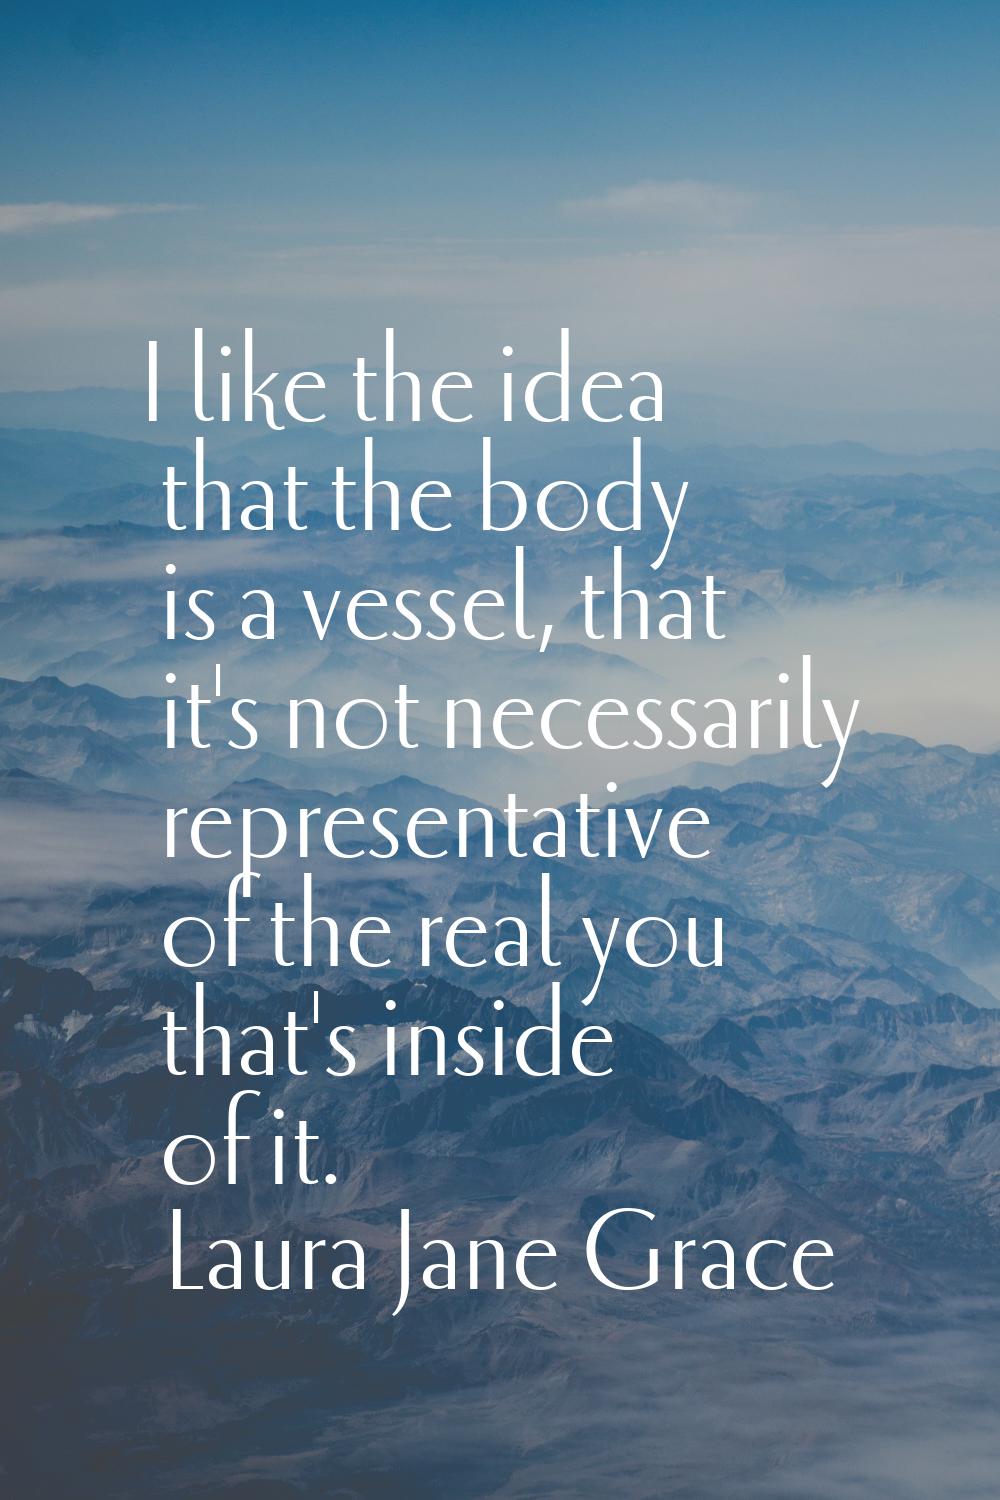 I like the idea that the body is a vessel, that it's not necessarily representative of the real you